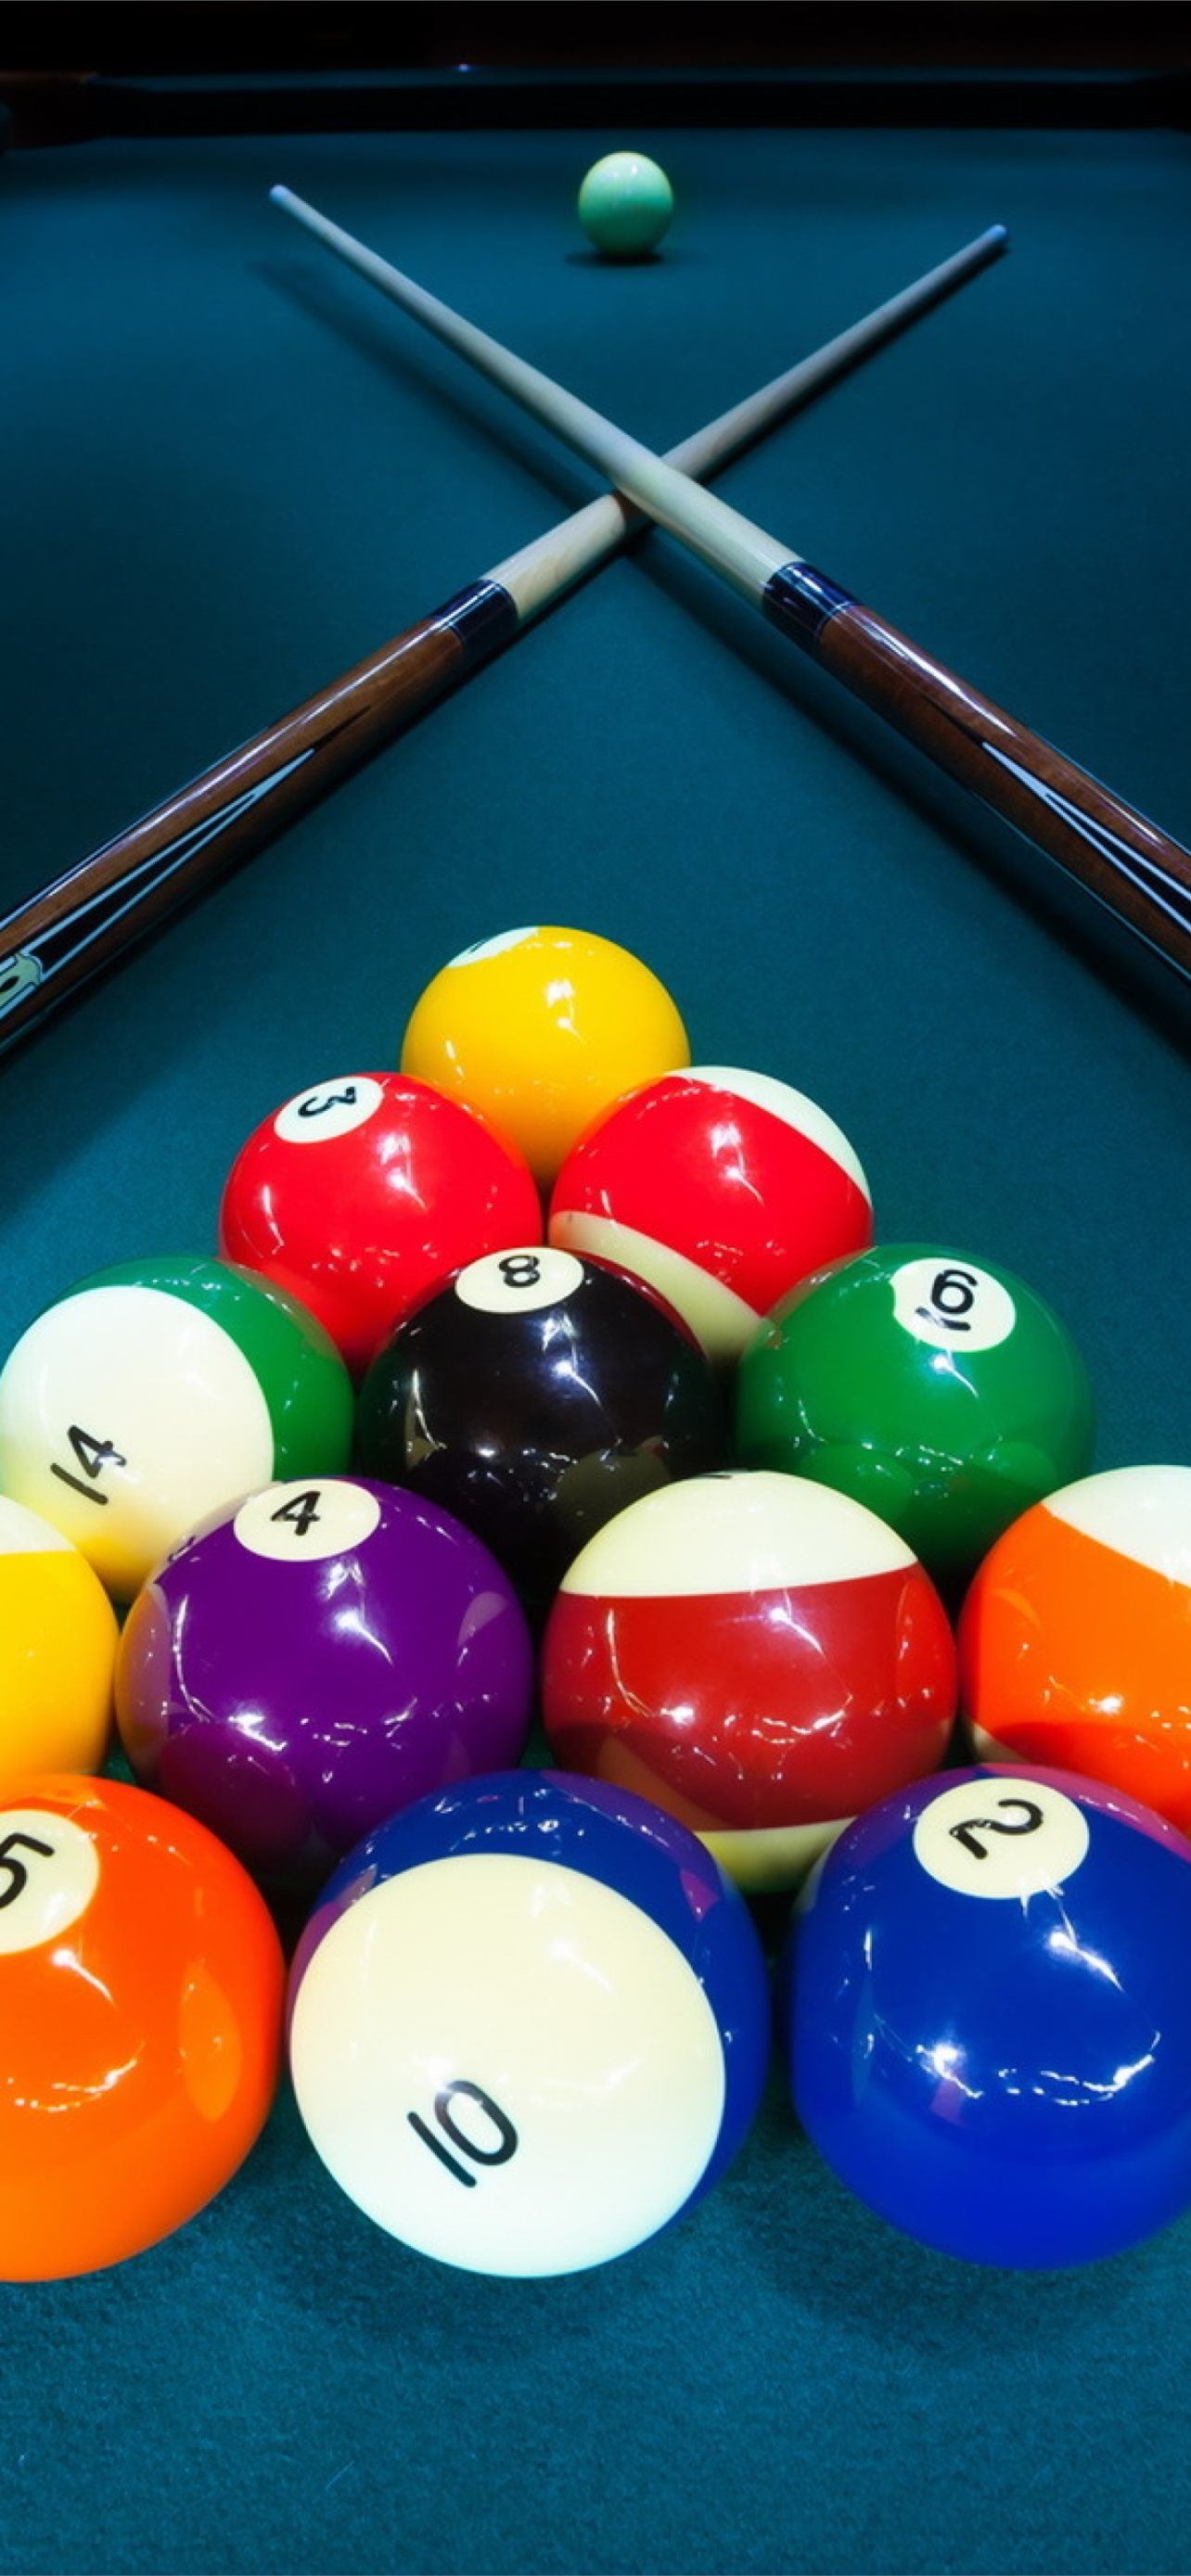 Billiards: A classic American eight-ball game, The most popular recreational game played by amateurs, Cane. 1290x2780 HD Wallpaper.